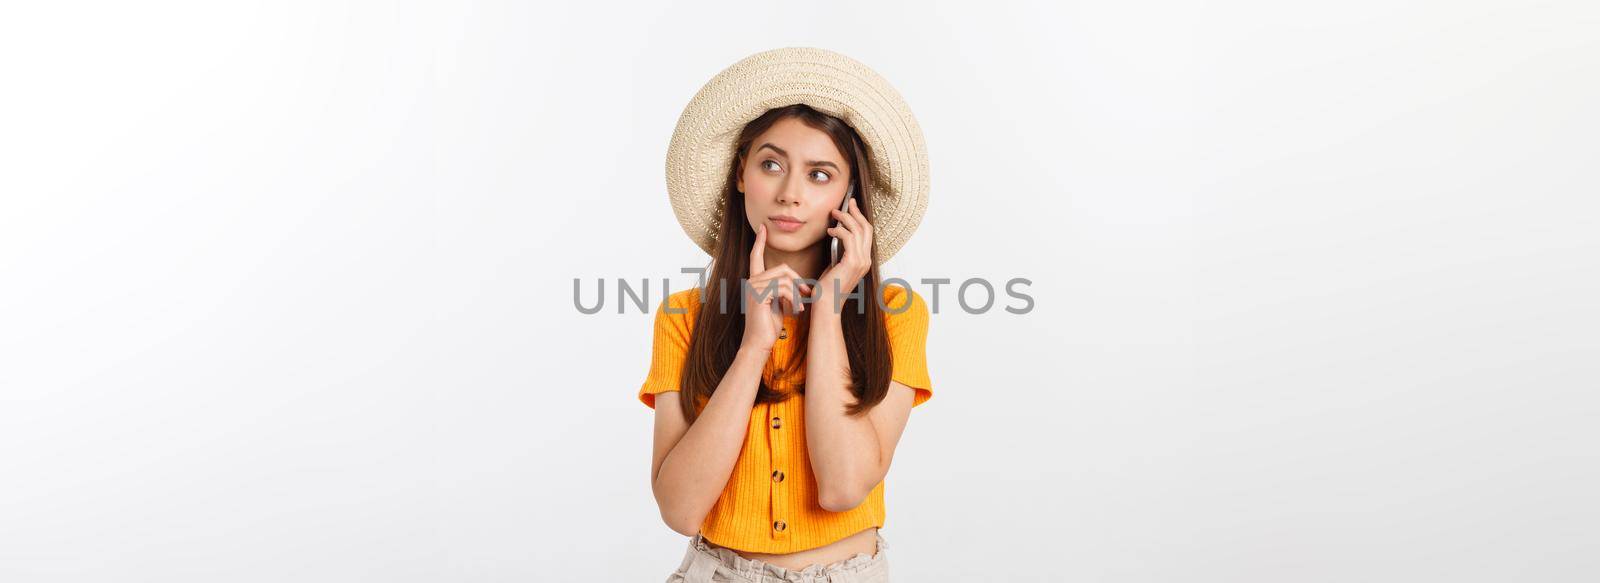 Serious young woman using smartphone and thinking isolated